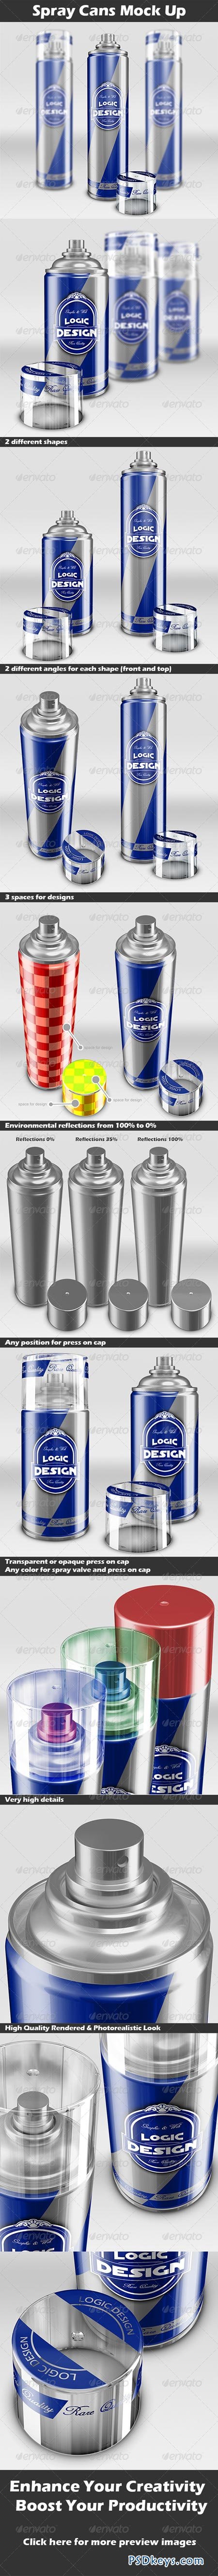 Spray Cans Mock Up 4405617